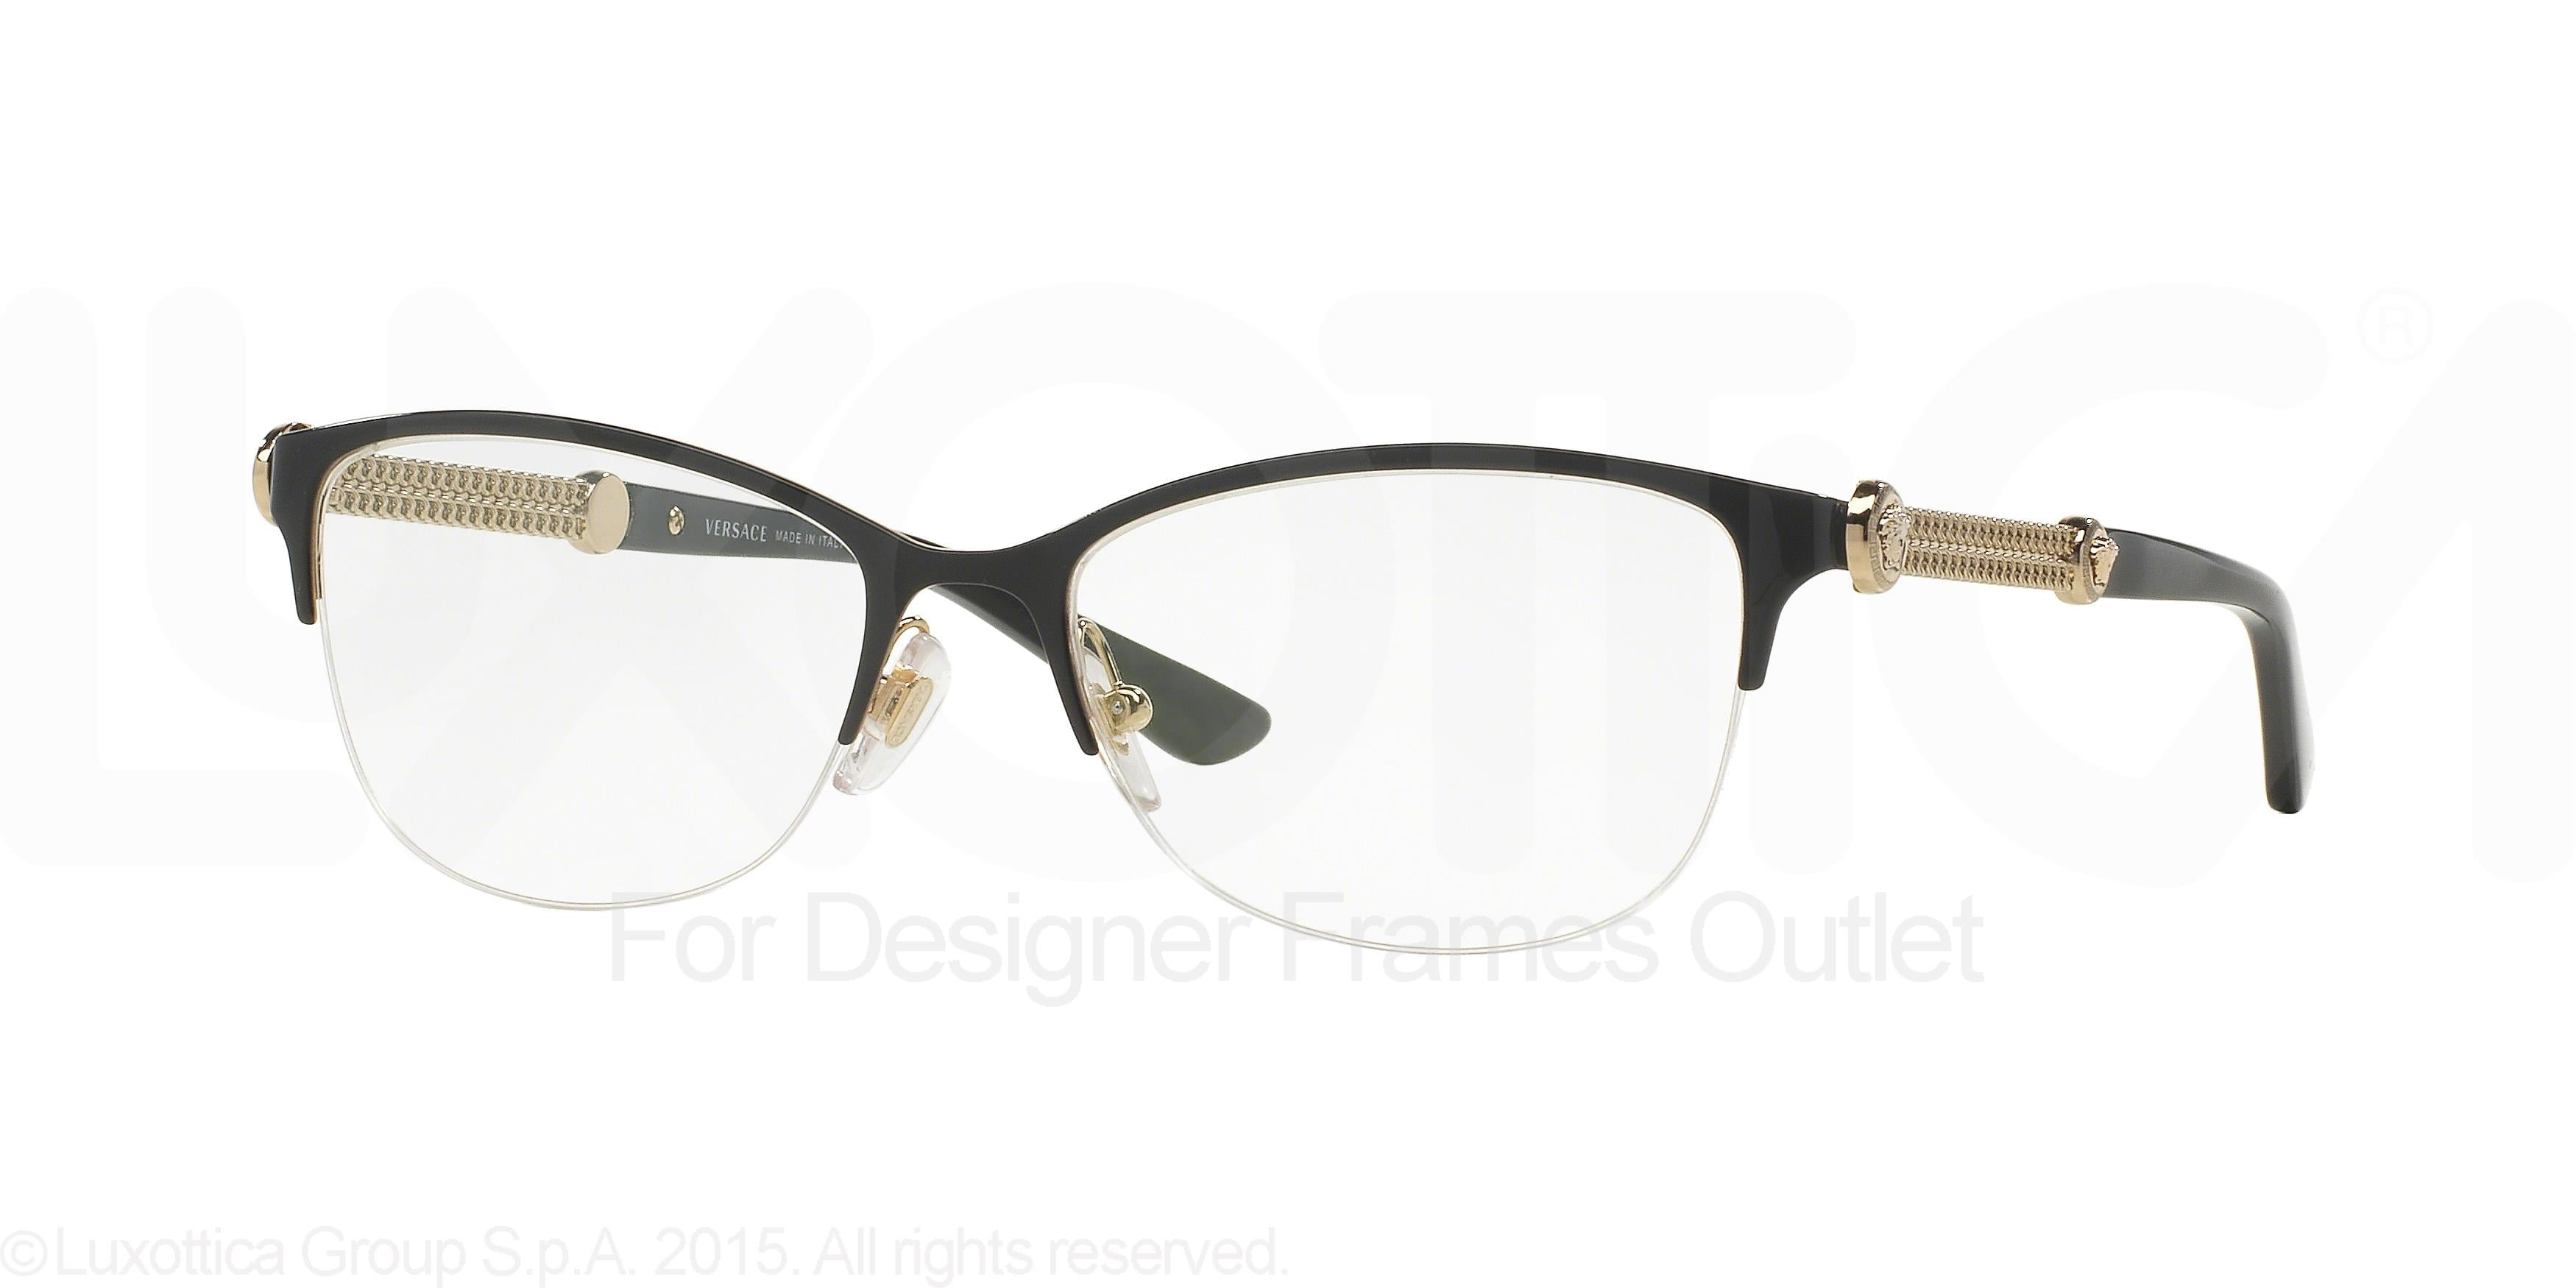 versace frames black and gold